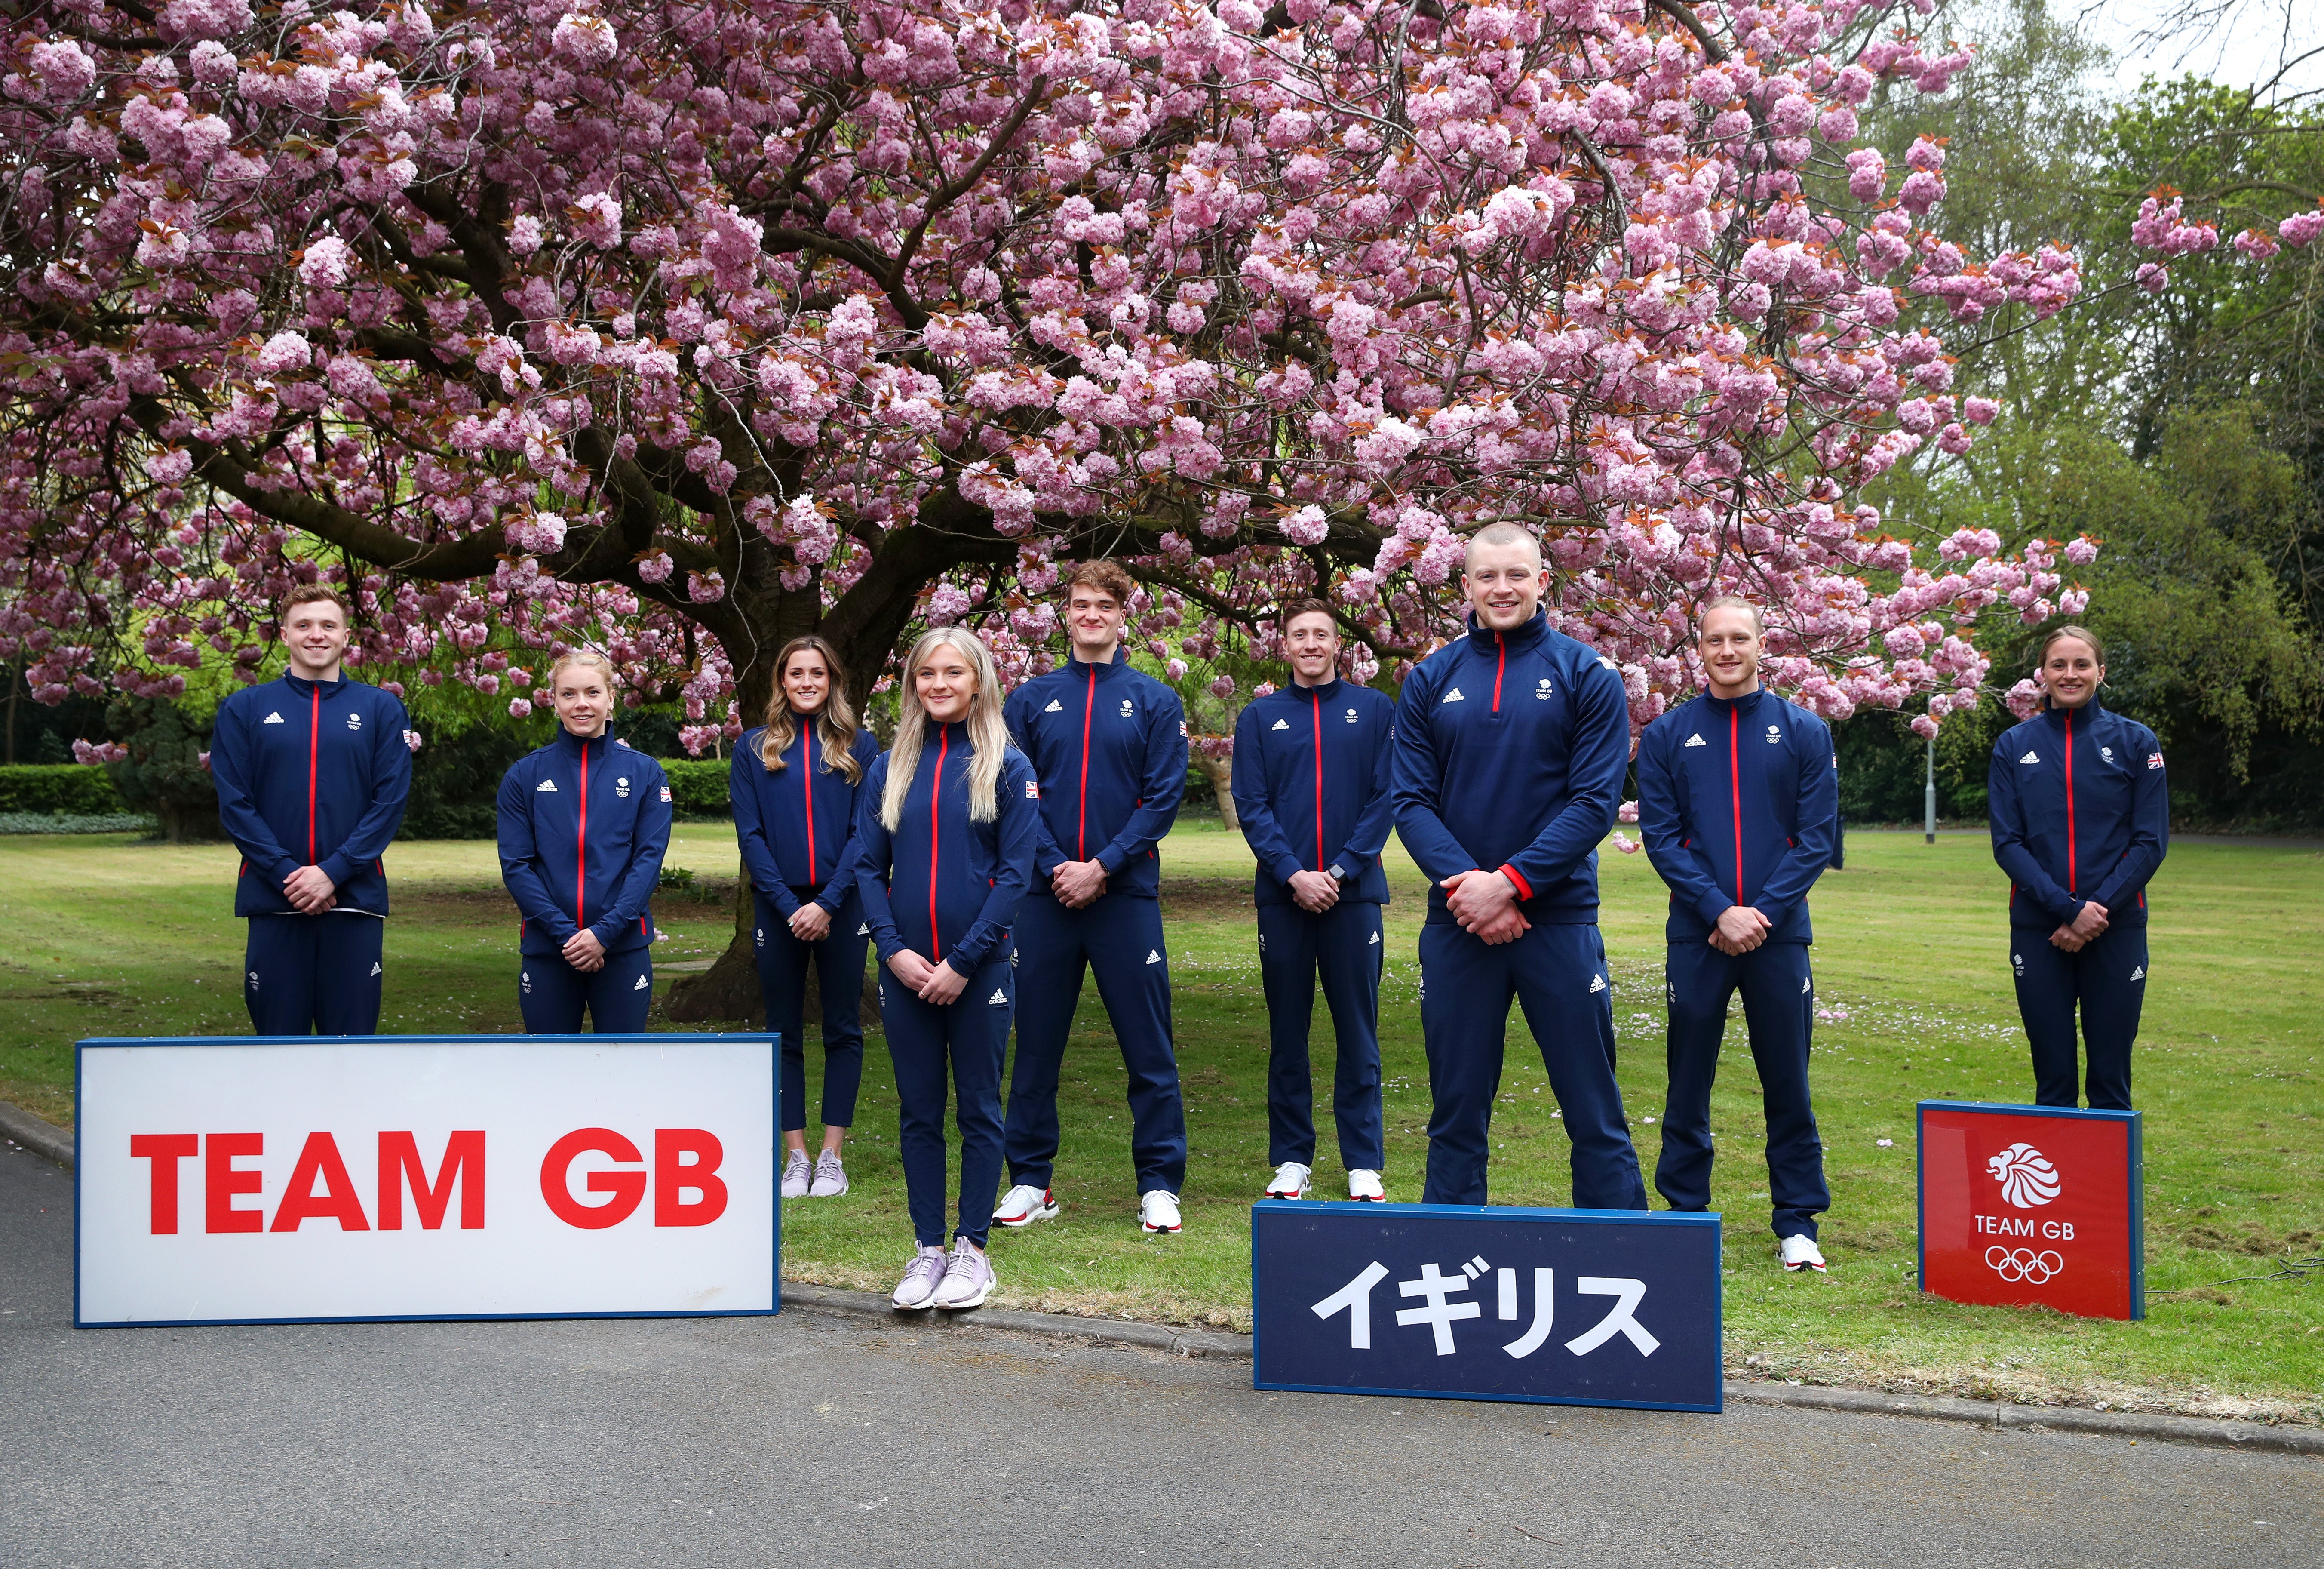 Members of the Team GB swimming squad were present for the socially-distanced announcement on Tuesday